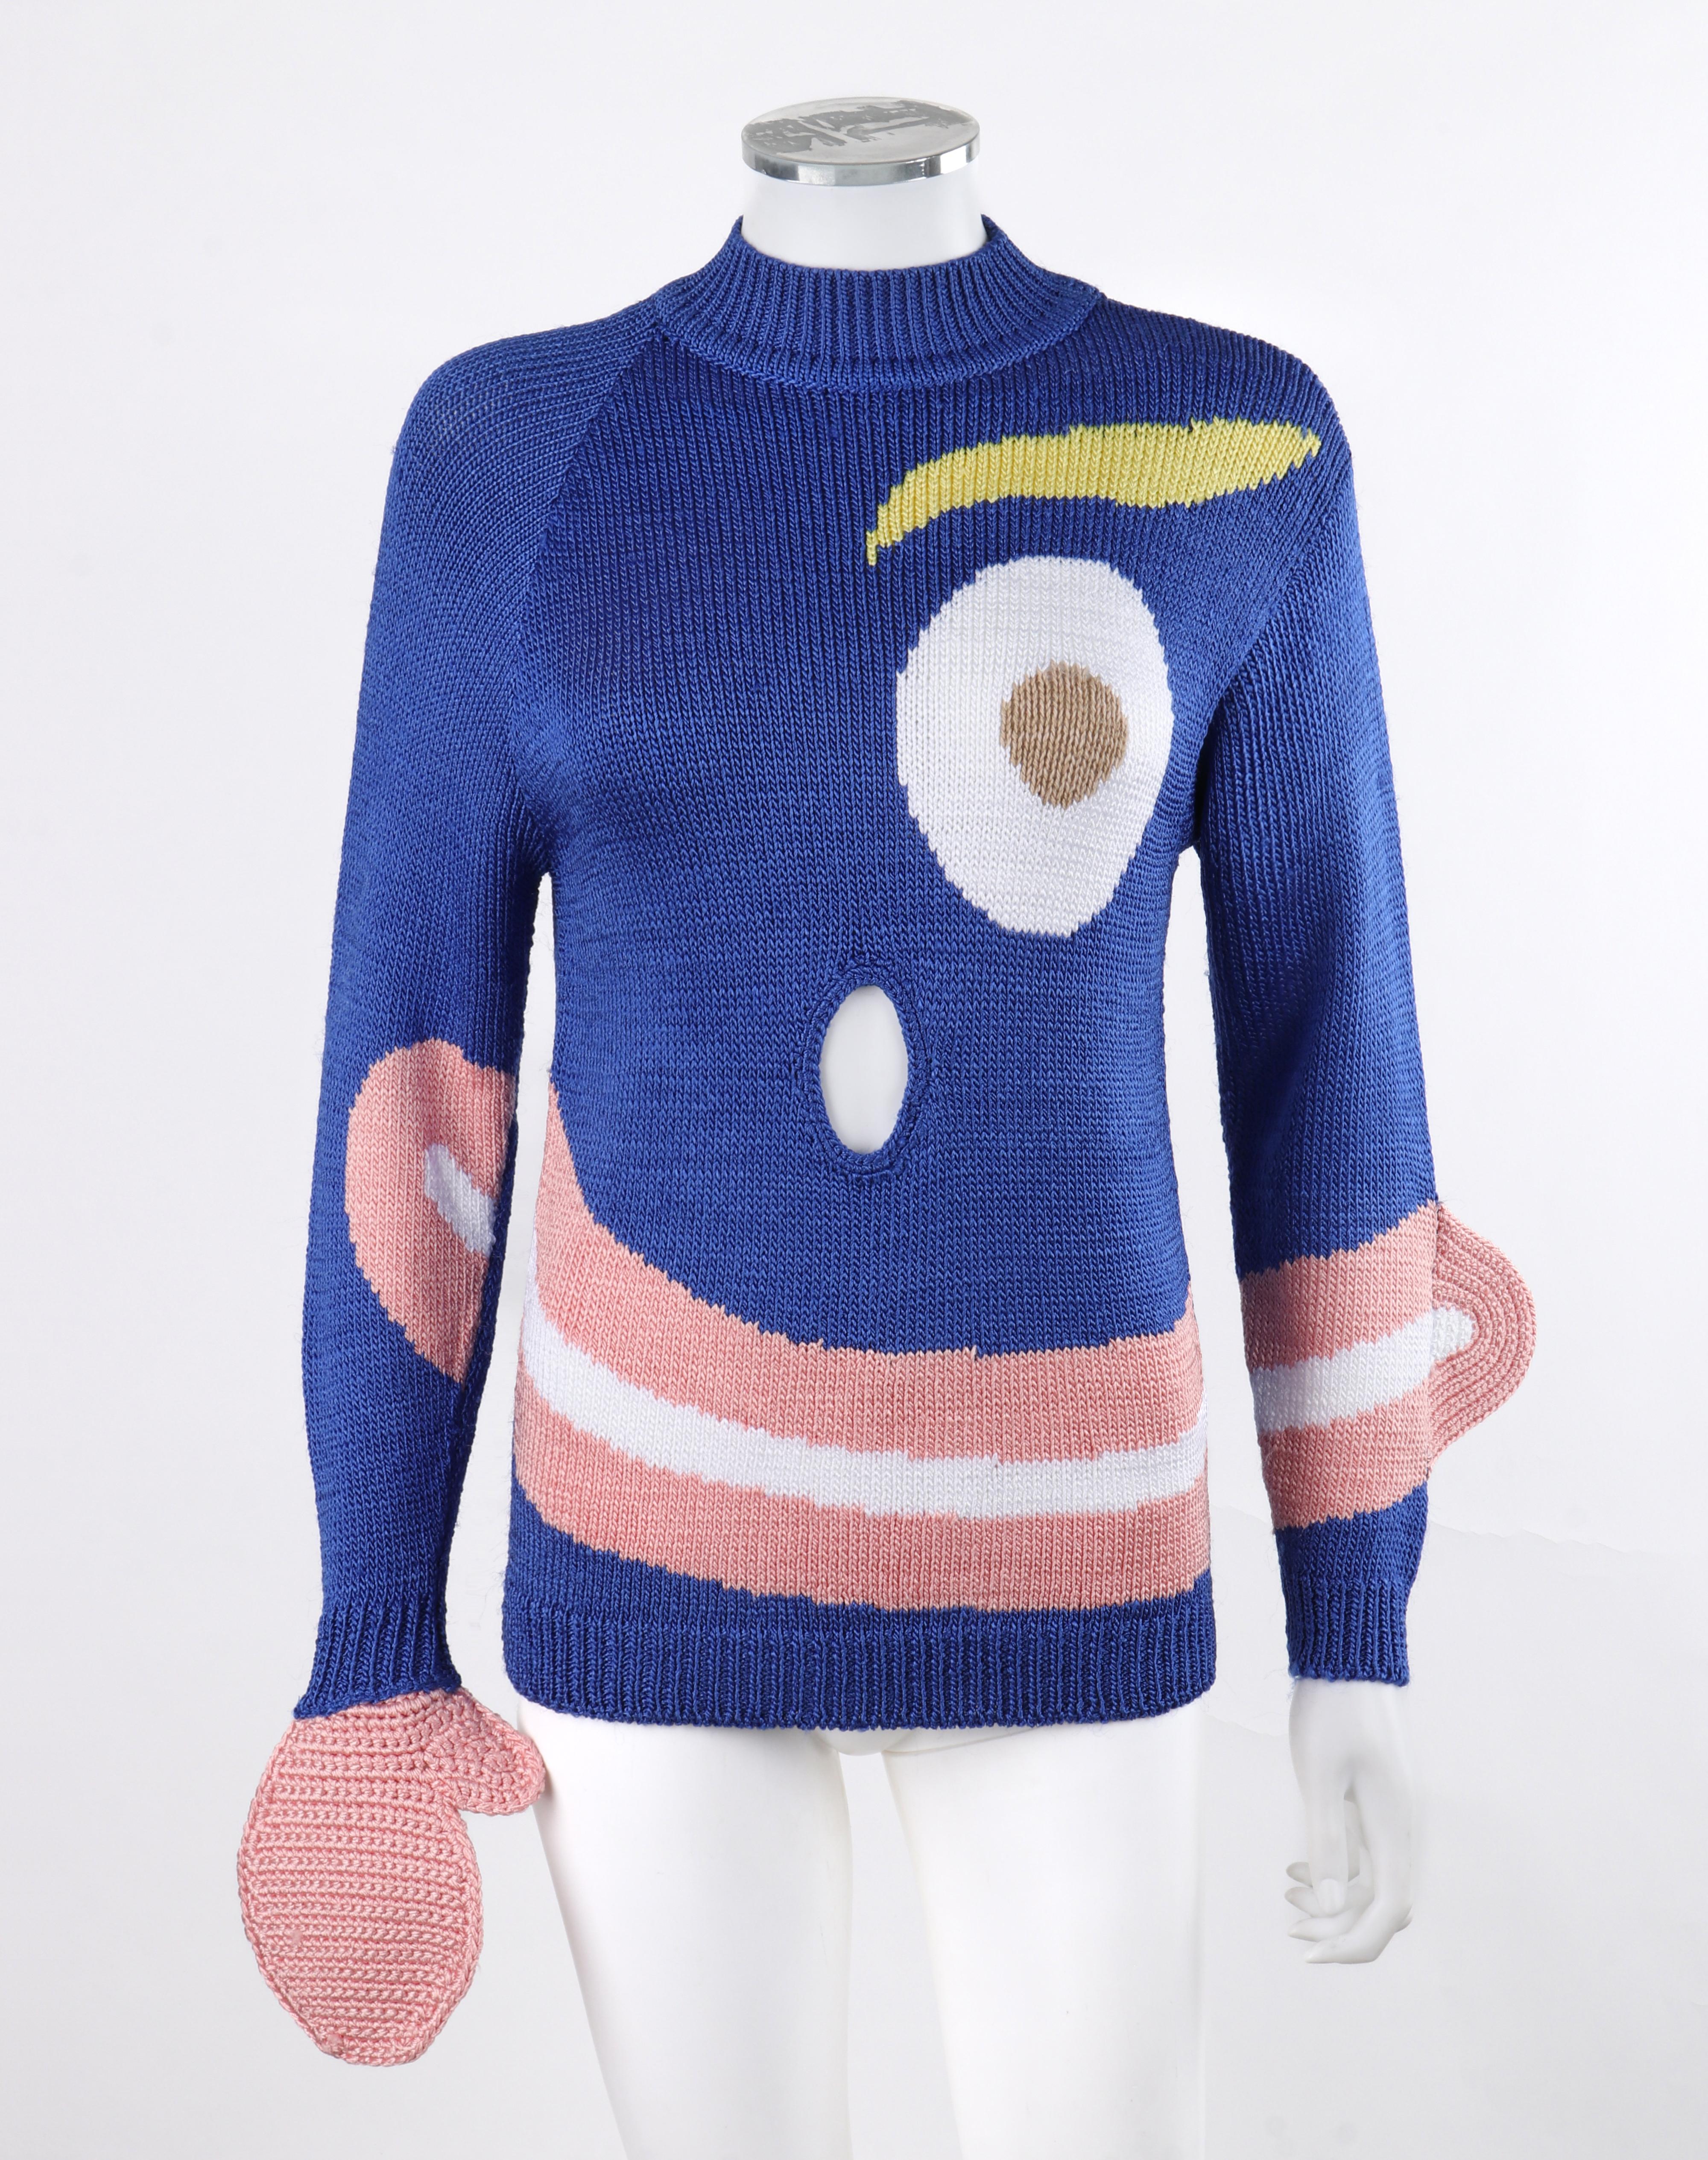 SURVIVAL OF THE FASHIONEST S/S 2020 Pull-over en tricot bleu Smiley Face Pull-over Top S Unisexe en vente